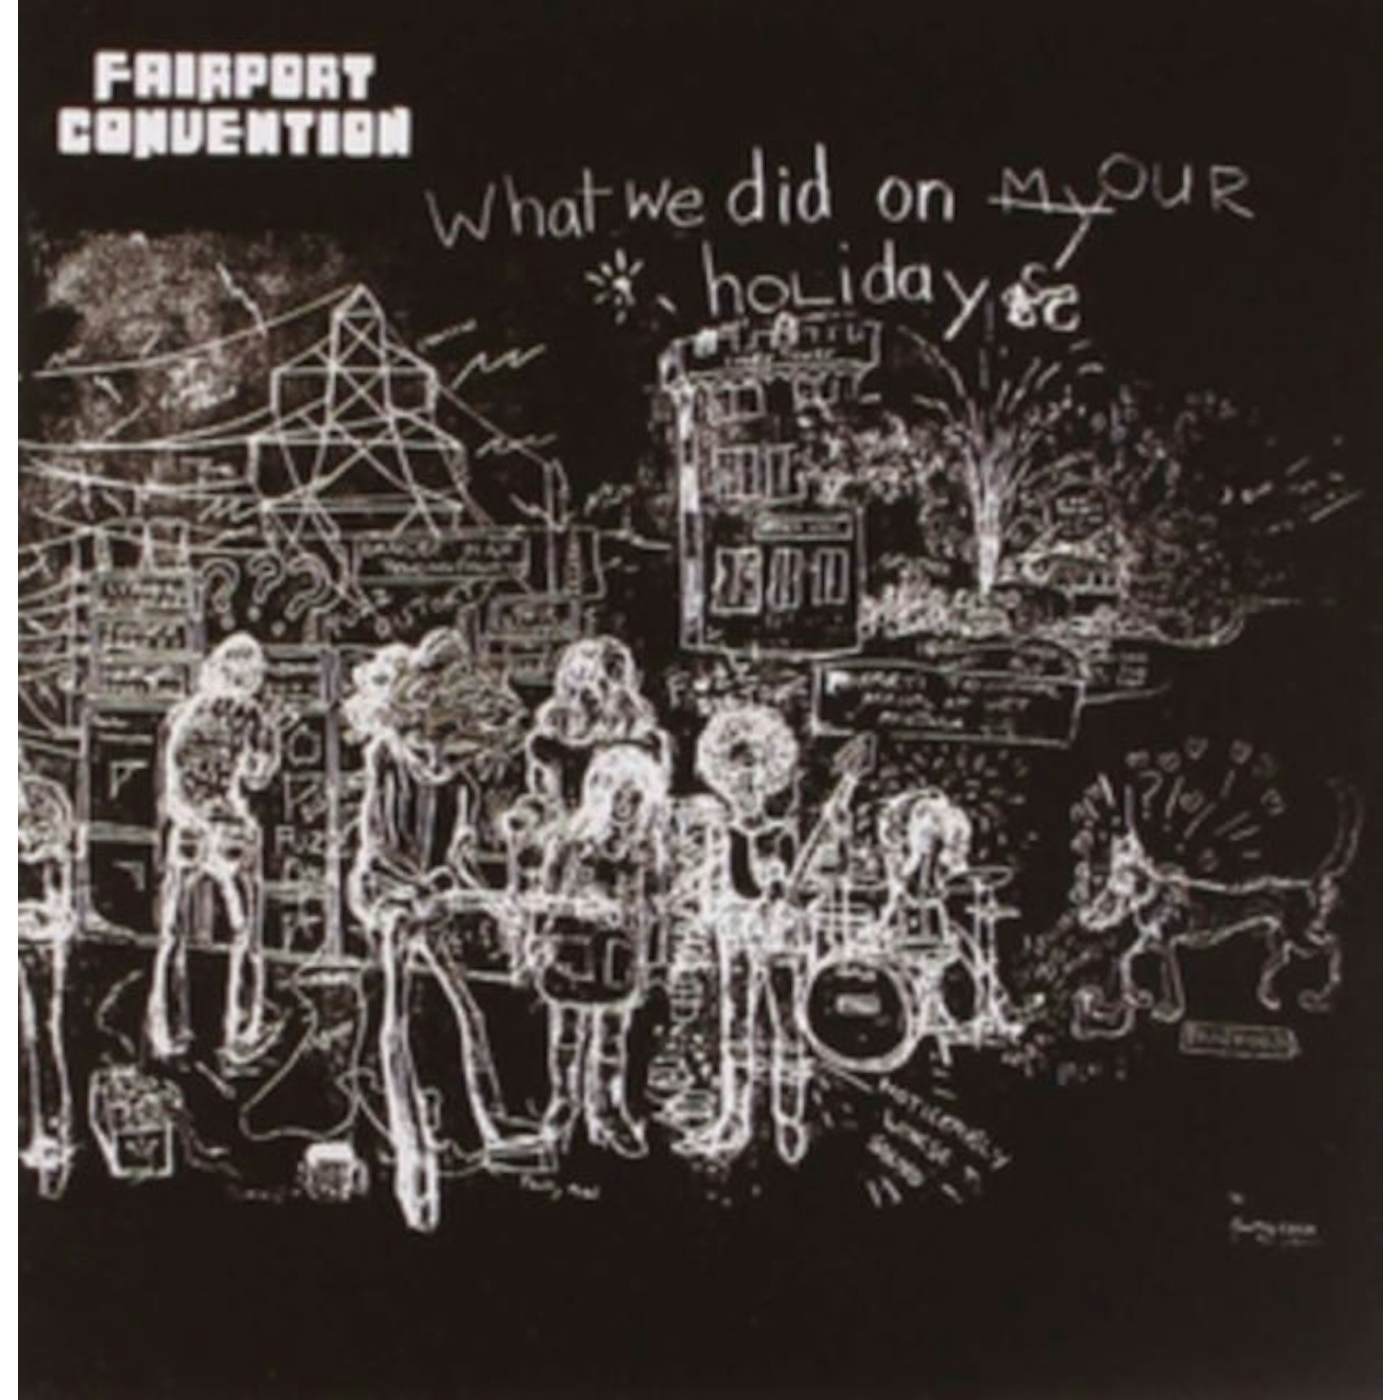 Fairport Convention CD - What We Did On Our Holiday